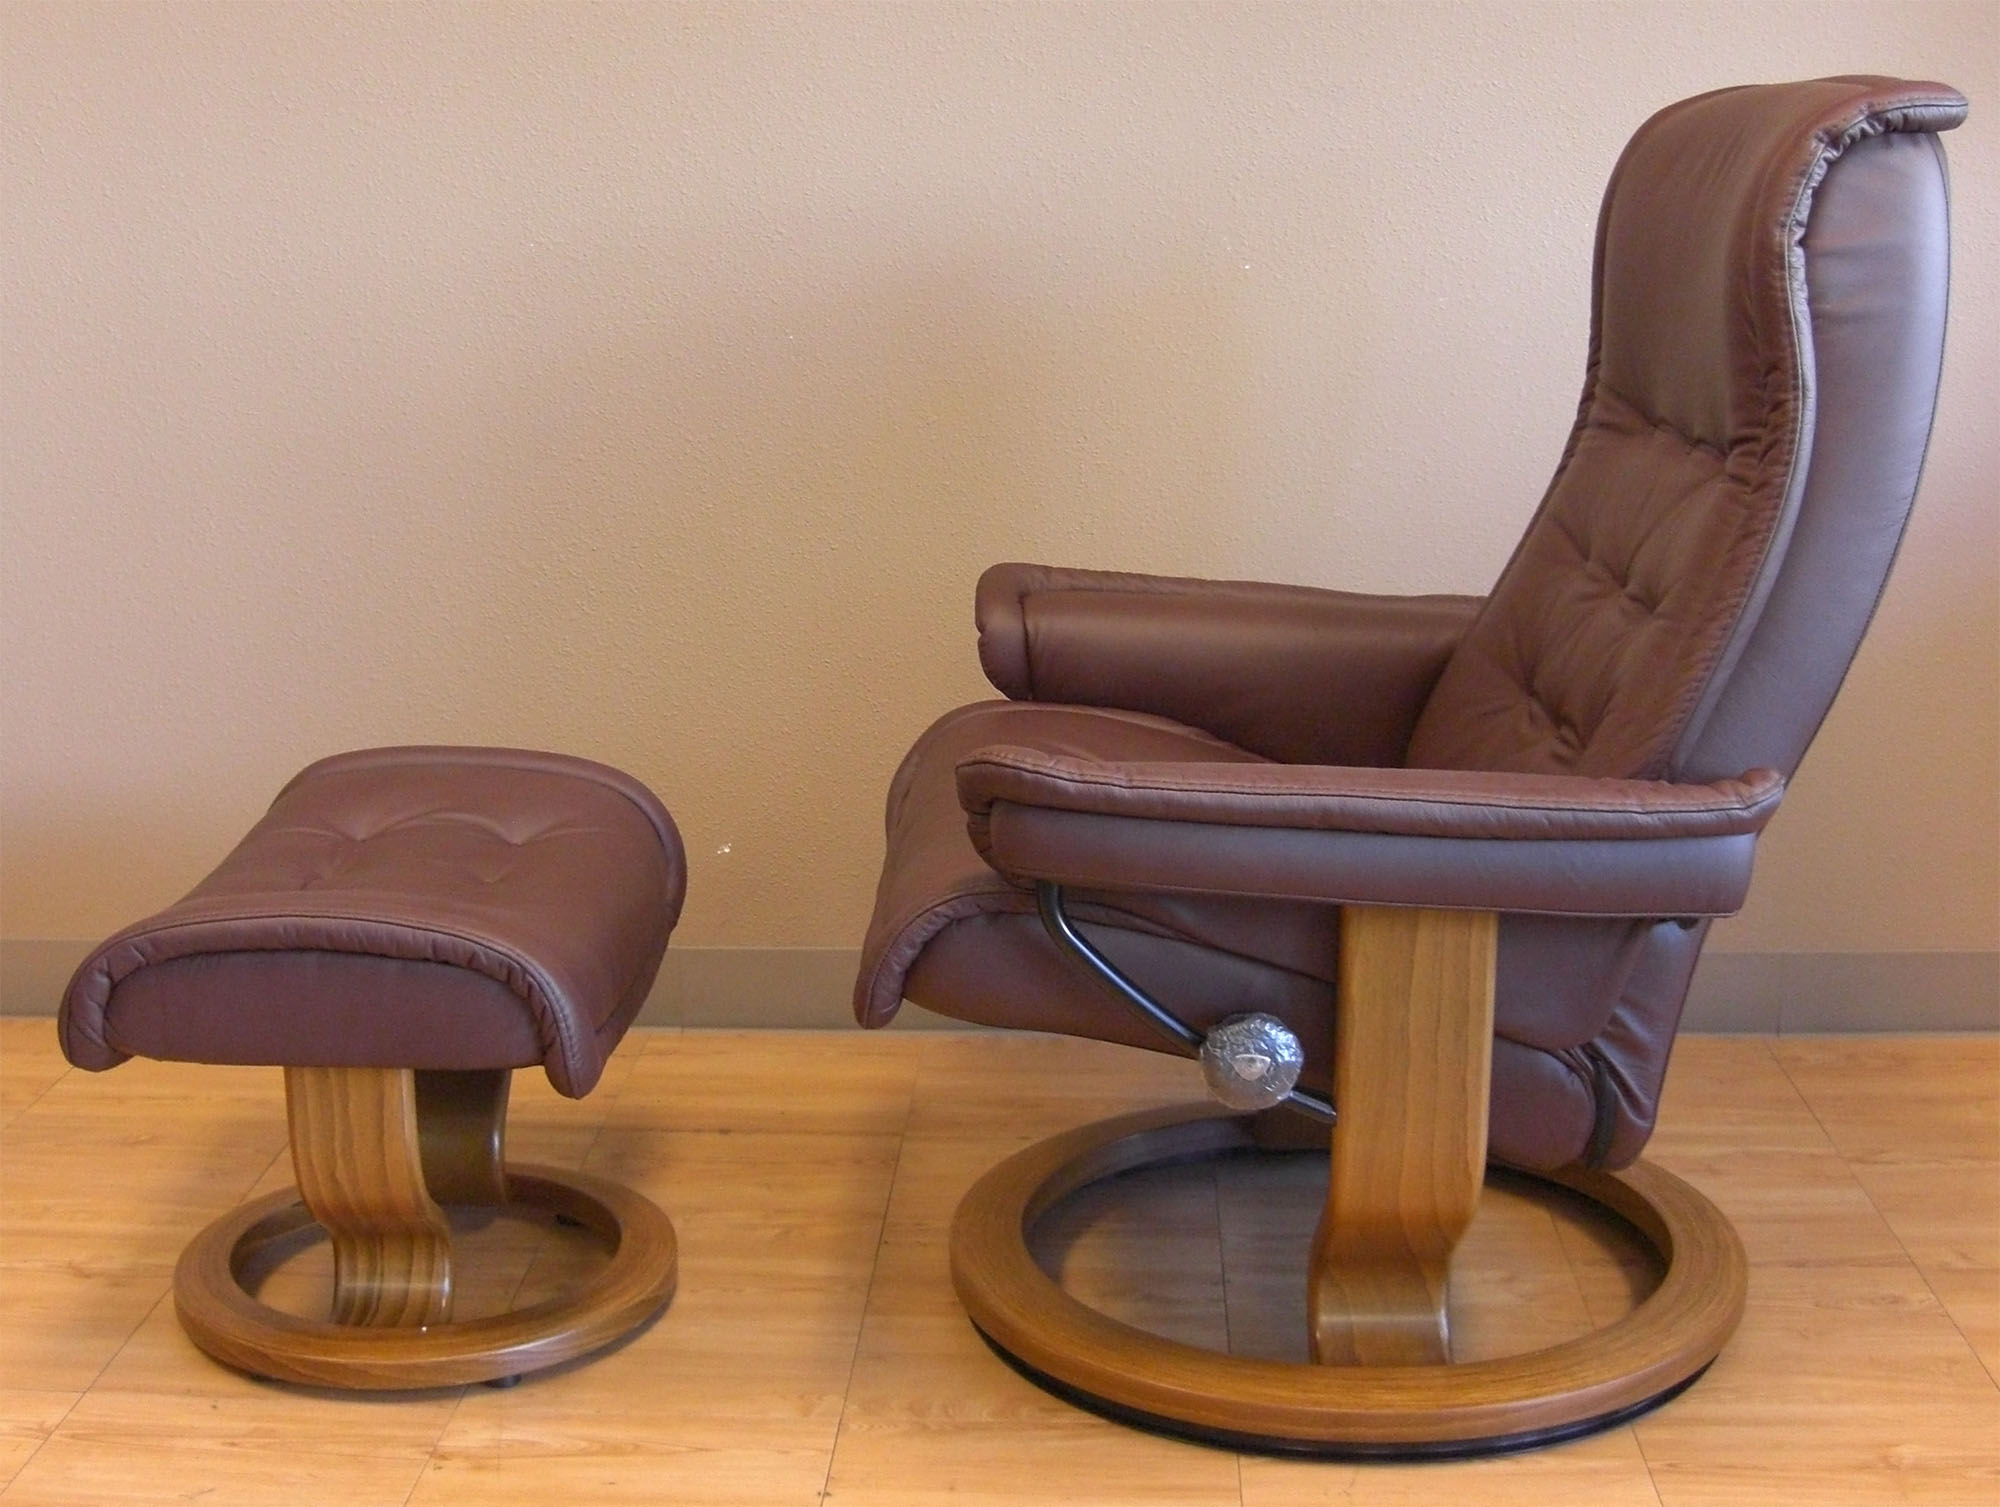 Stressless Paloma Coffee 09433 Leather Color Recliner Chair and Ottoman from Ekornes